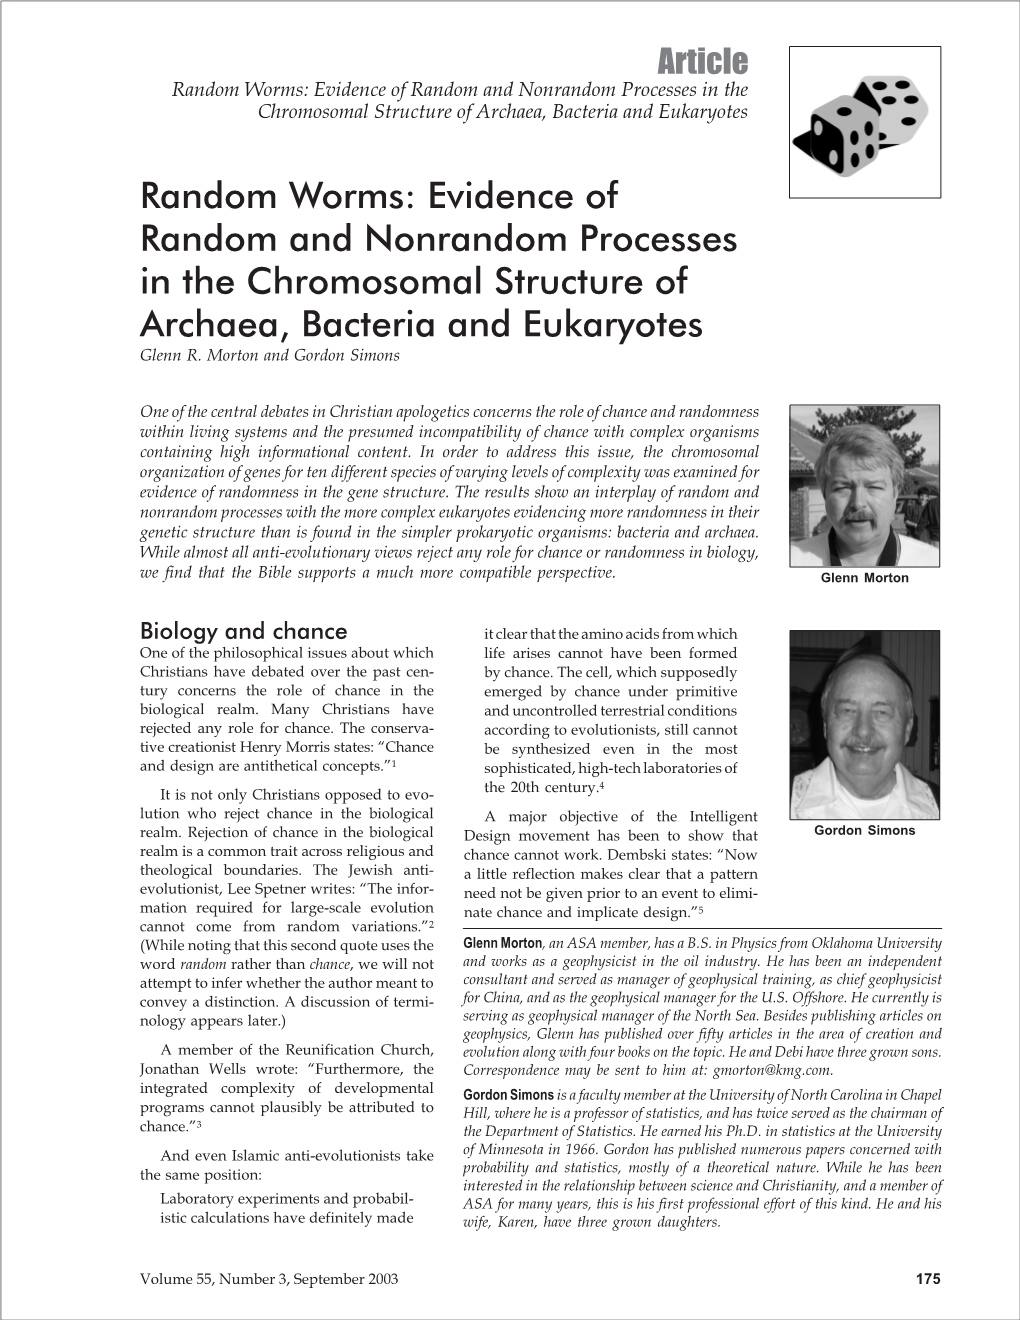 Evidence of Random and Nonrandom Processes in the Chromosomal Structure of Archaea, Bacteria and Eukaryotes